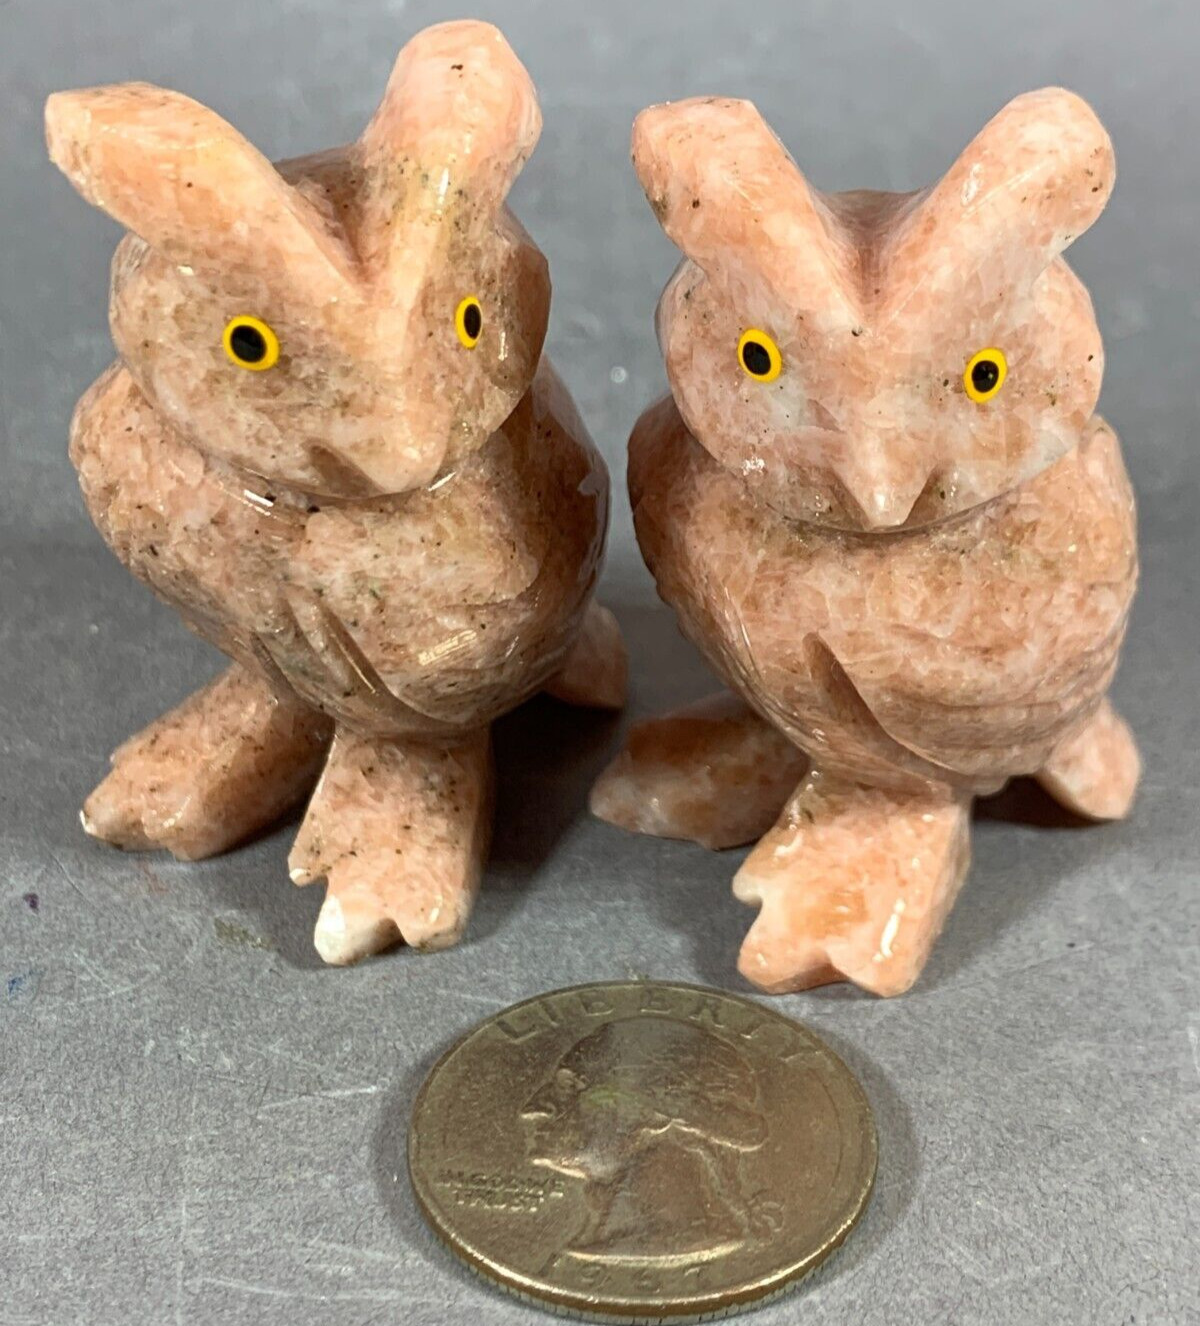 OWLS, A PAIR OF DOLOMITE OWLS IN A SALMON COLOR, HAND CARVED WITH MUCH DETAIL